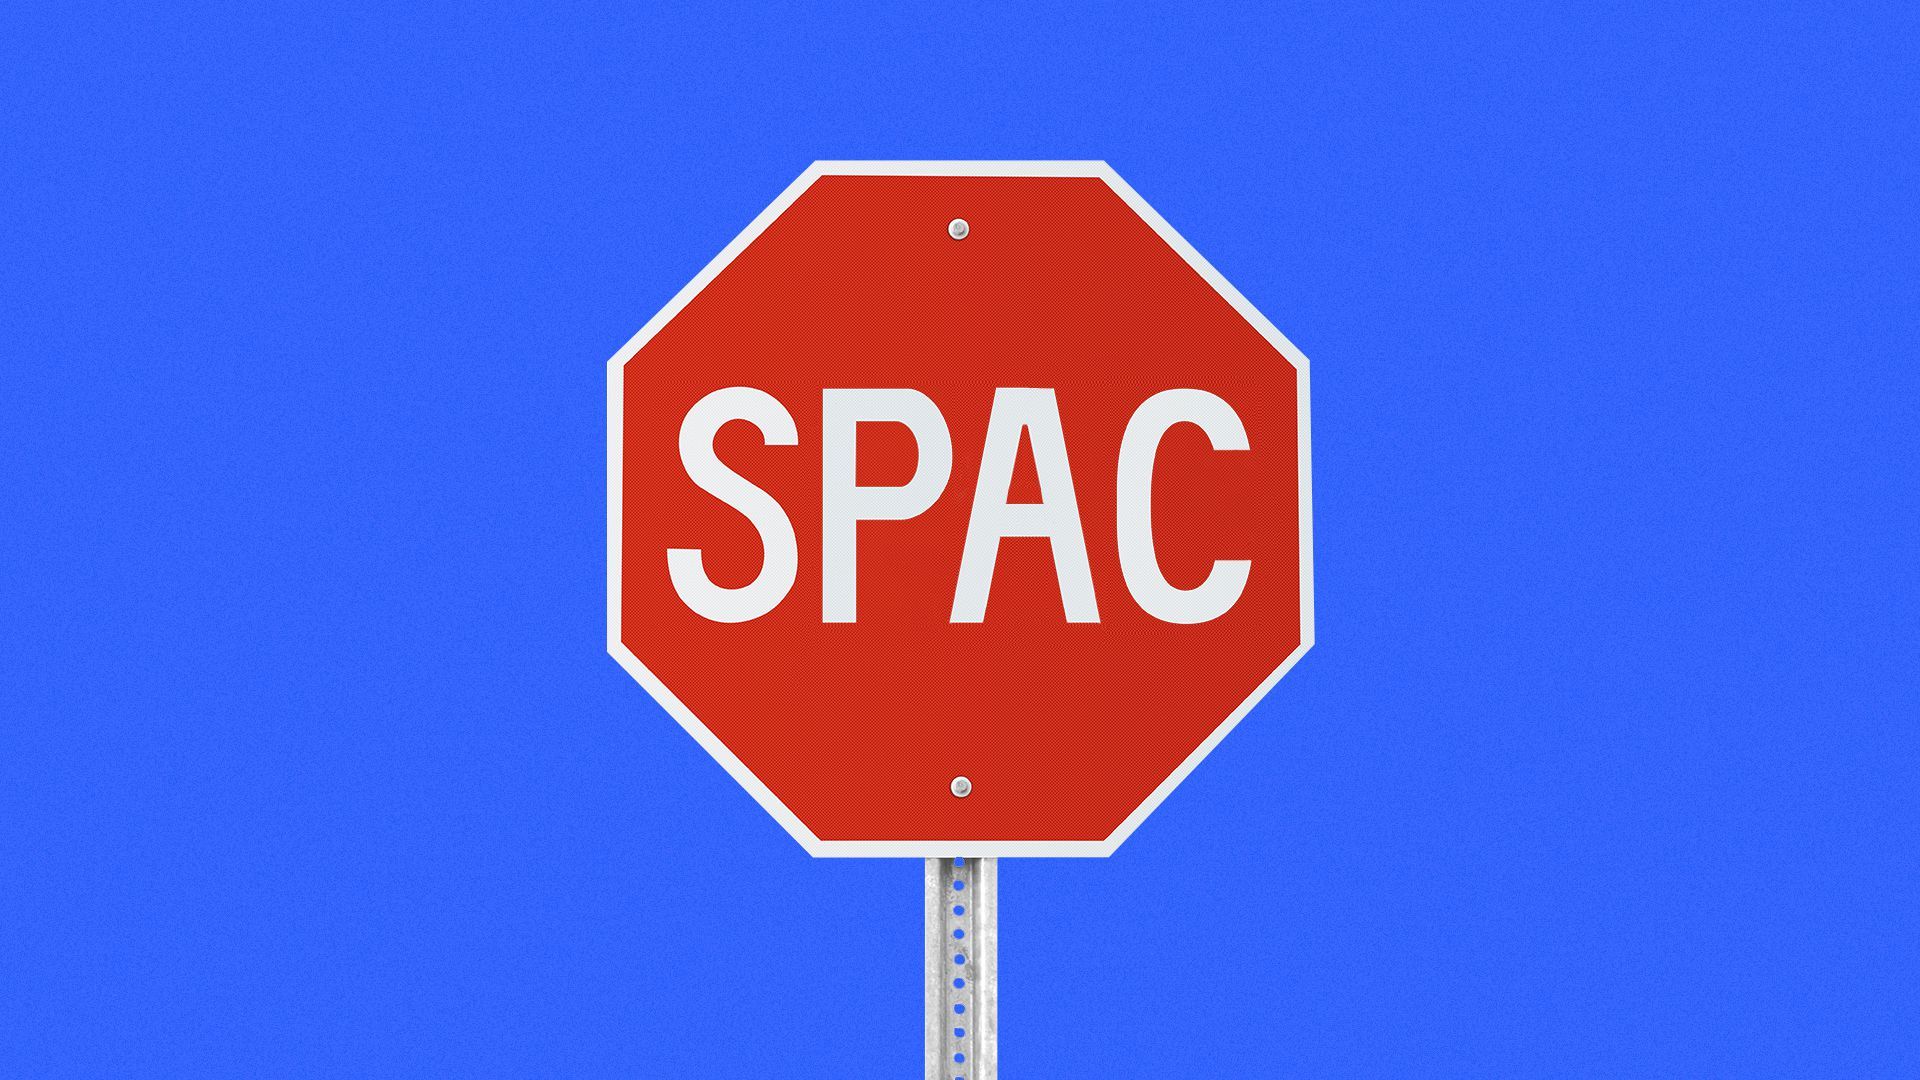 Illustration of a stop sign with SPAC written on it